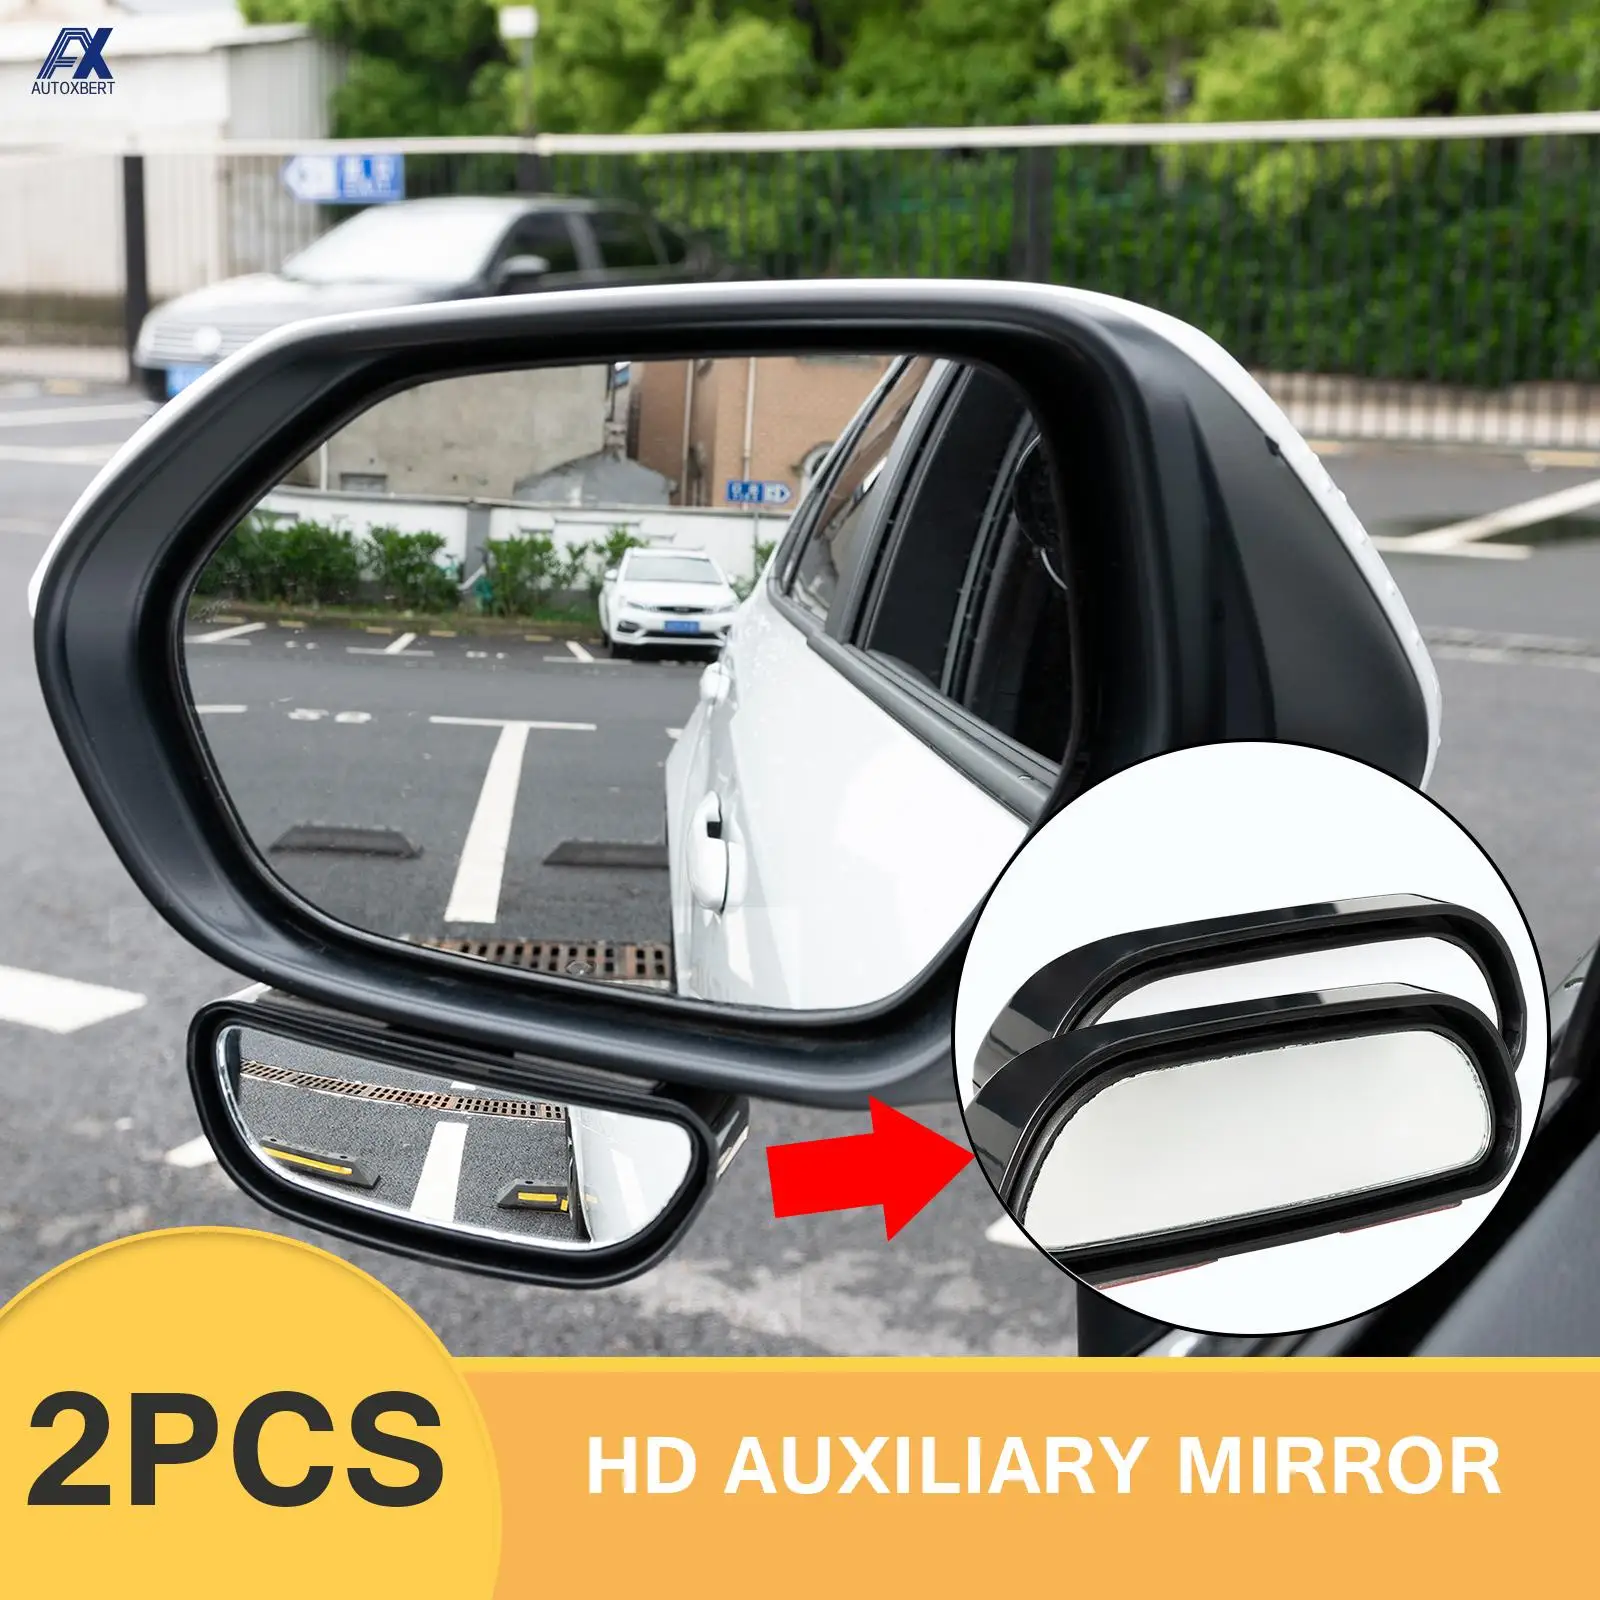 2Pcs 360 Degree Stick On Blind Spot Mirror Car Reverse Parking Road Safety Wide Angle Convex Rearview Auxiliary Rear View Mirror